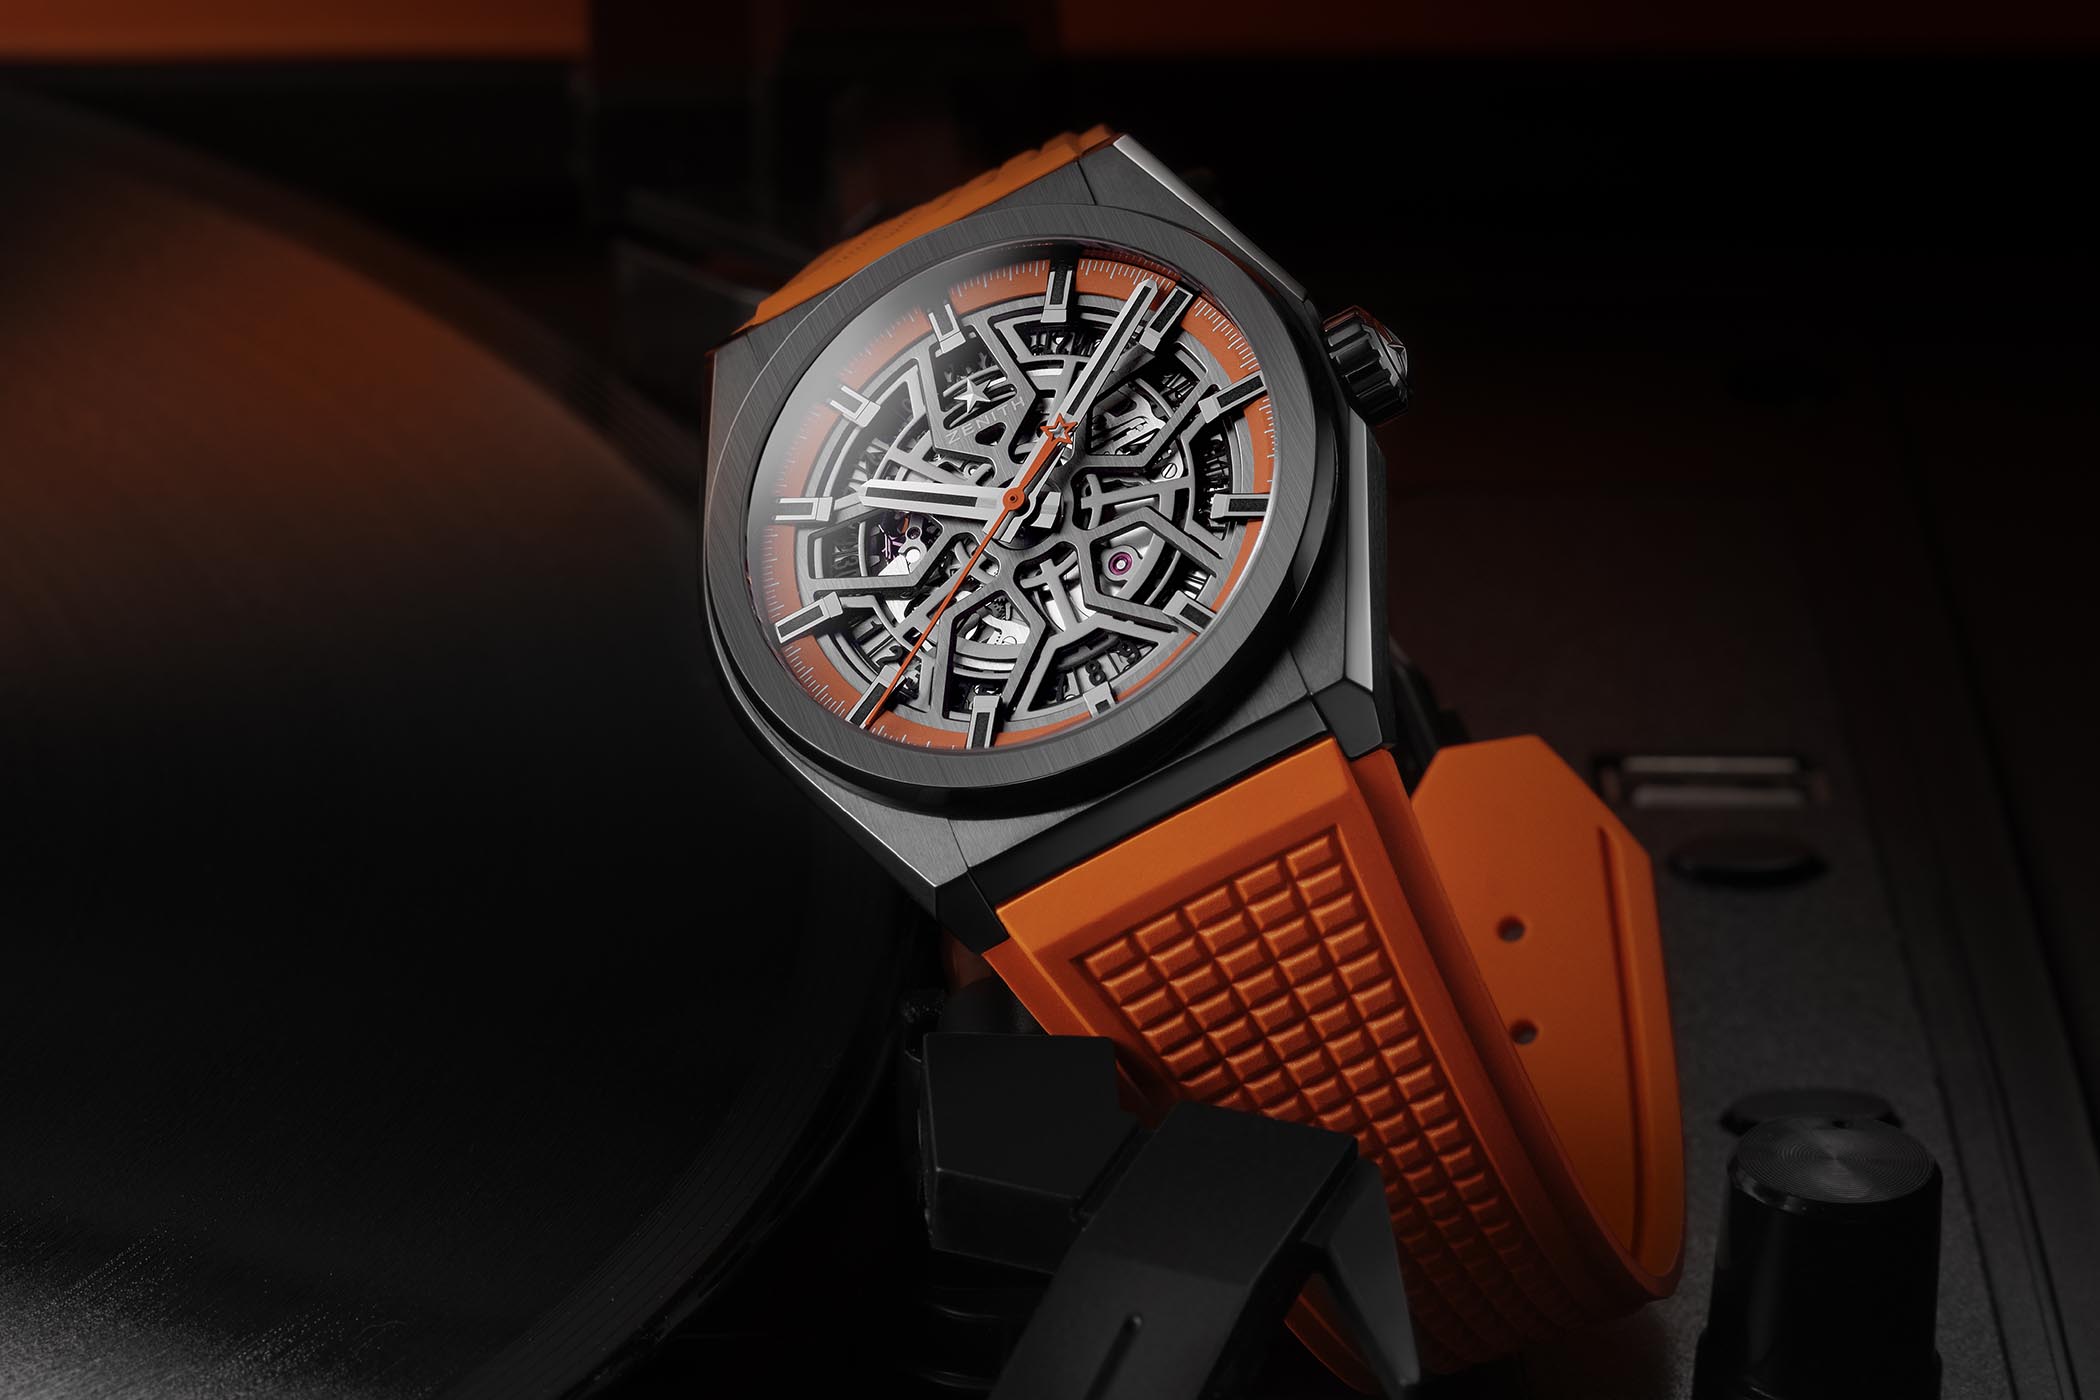 Introducing The Zenith Defy Classic Black Ceramic Skeleton Swizz Beatz  Edition Watch –  – Featuring Watch Reviews, Critiques,  Reports & News